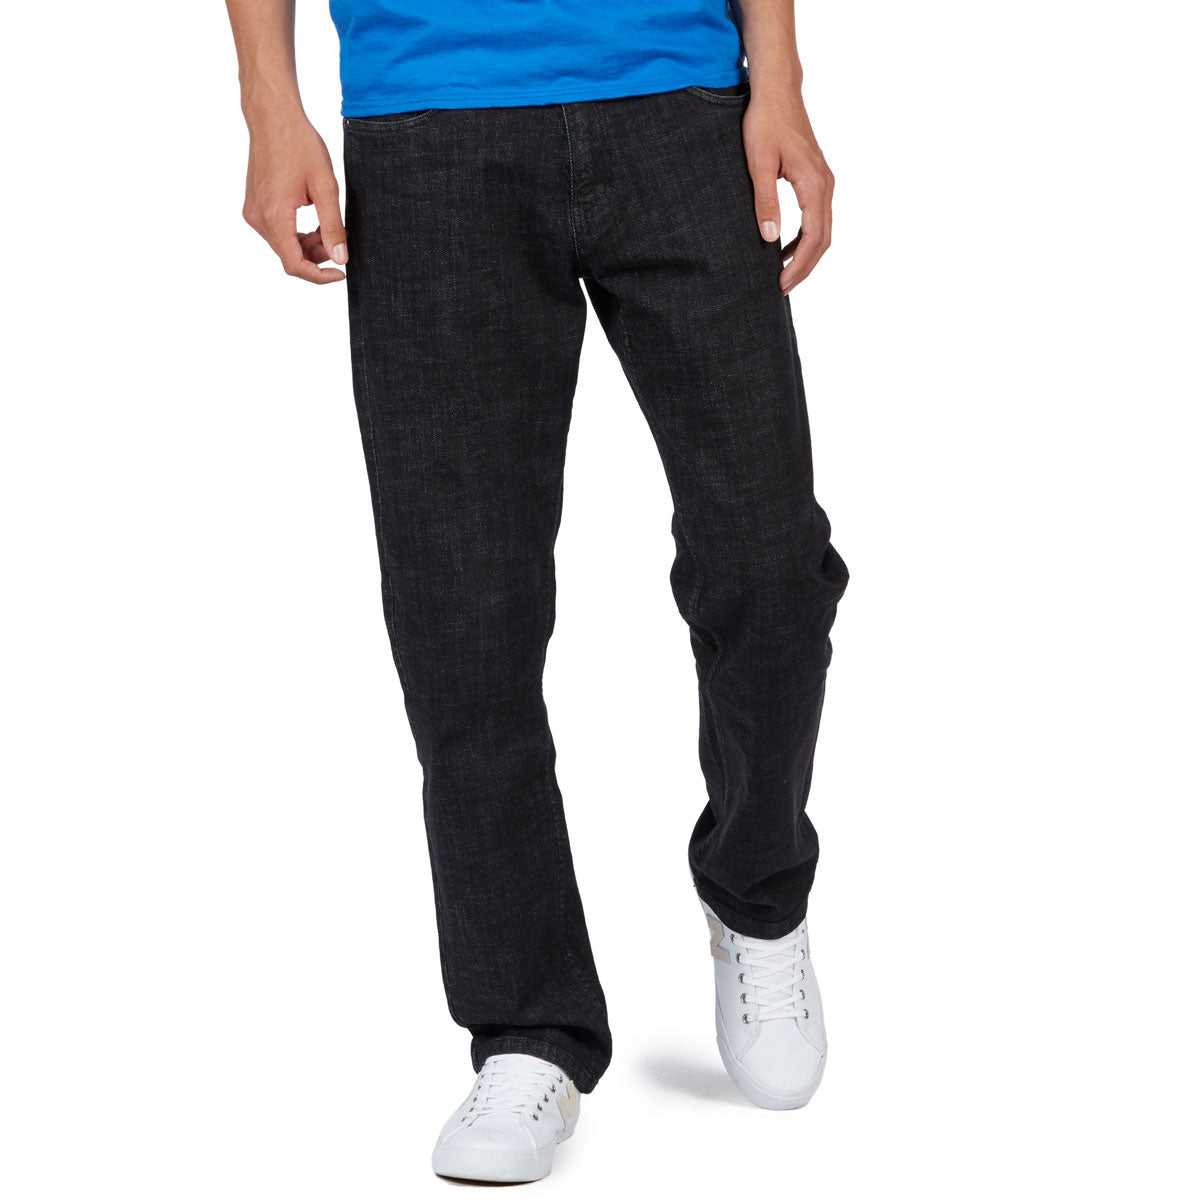 CCS Relaxed Fit Jeans - Washed Black image 4